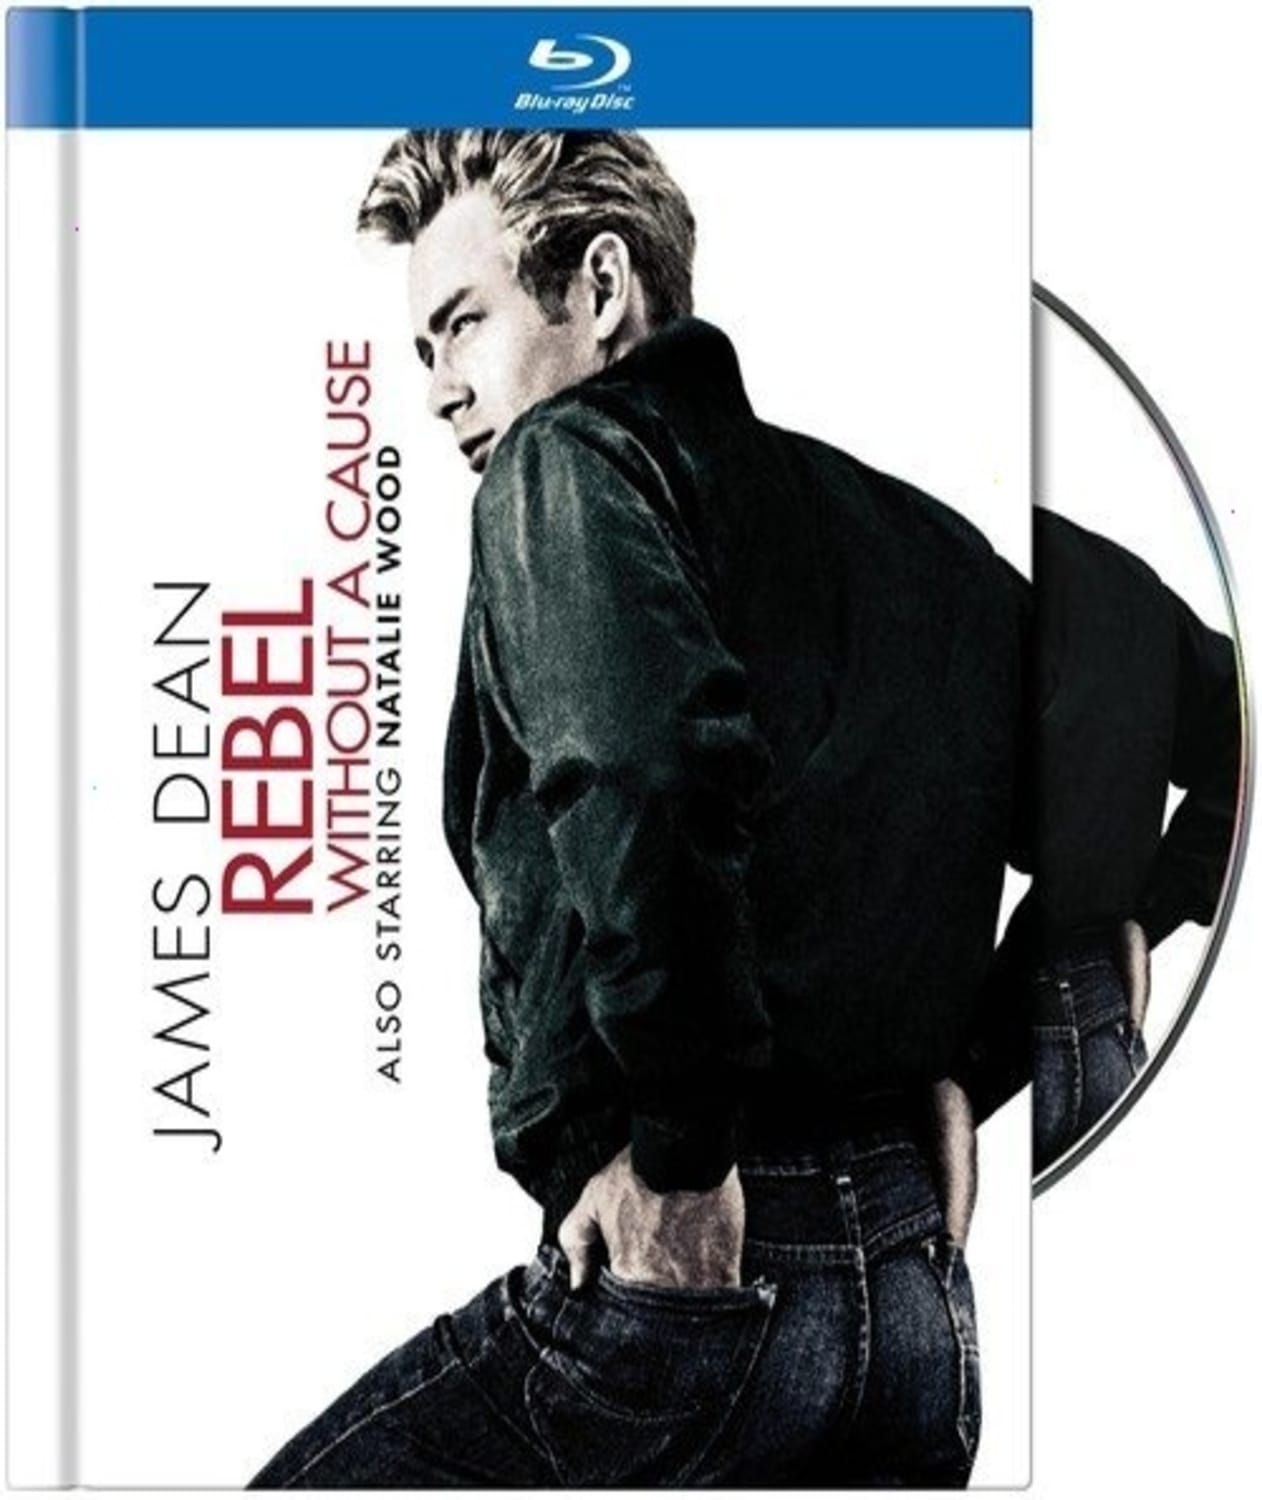 Rebel Without a Cause (Blu-ray) on MovieShack